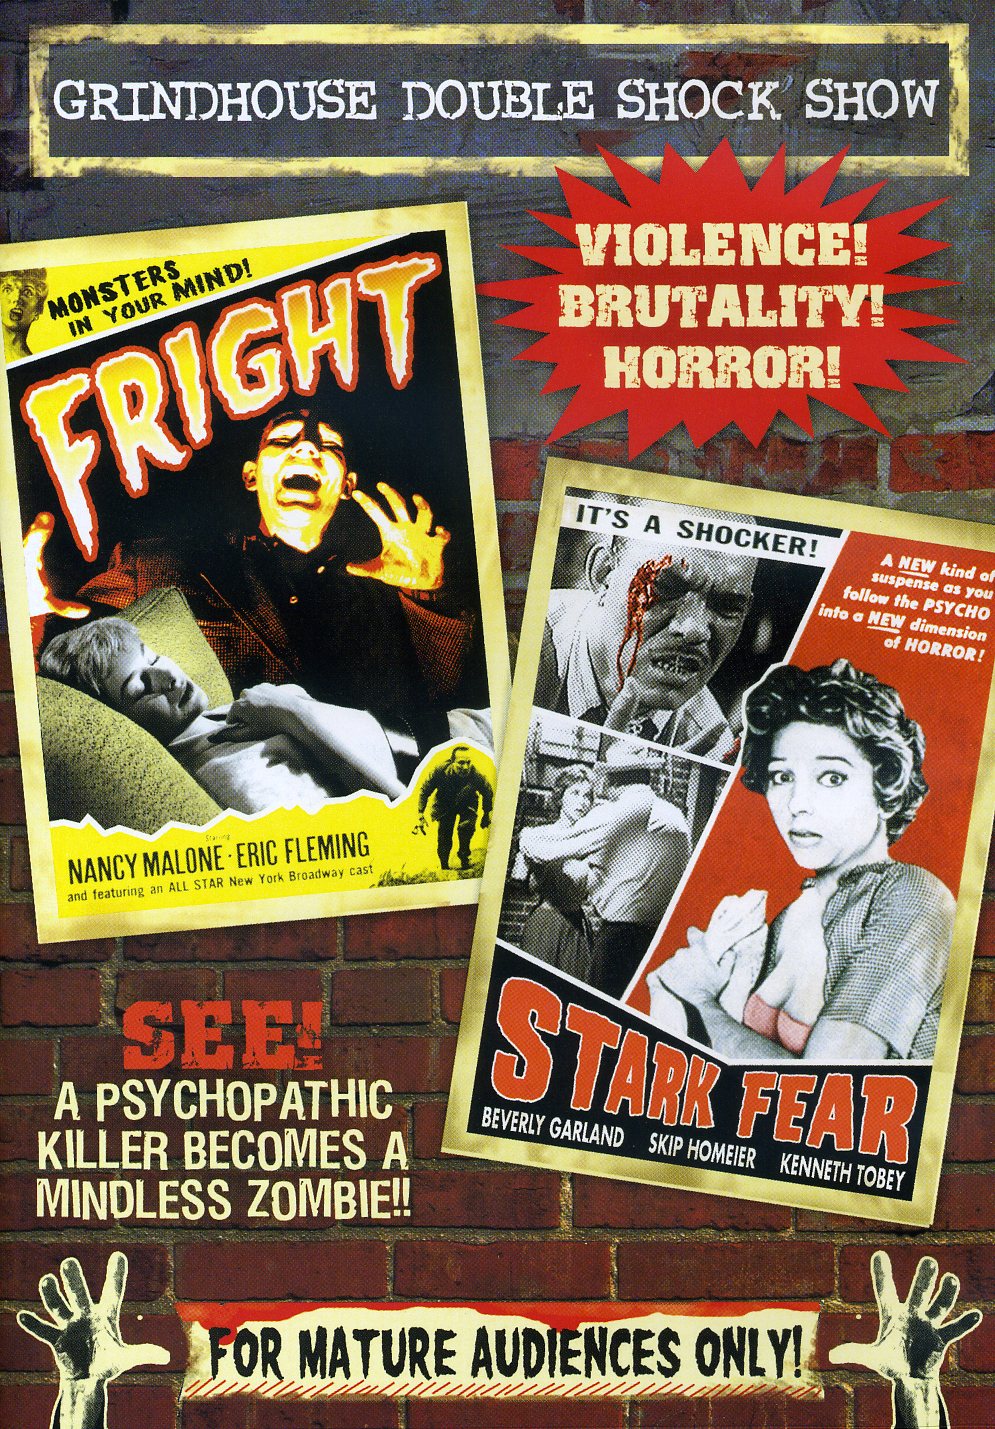 GRINDHOUSE DOUBLE FEATURE: FRIGHT / STARK FEAR